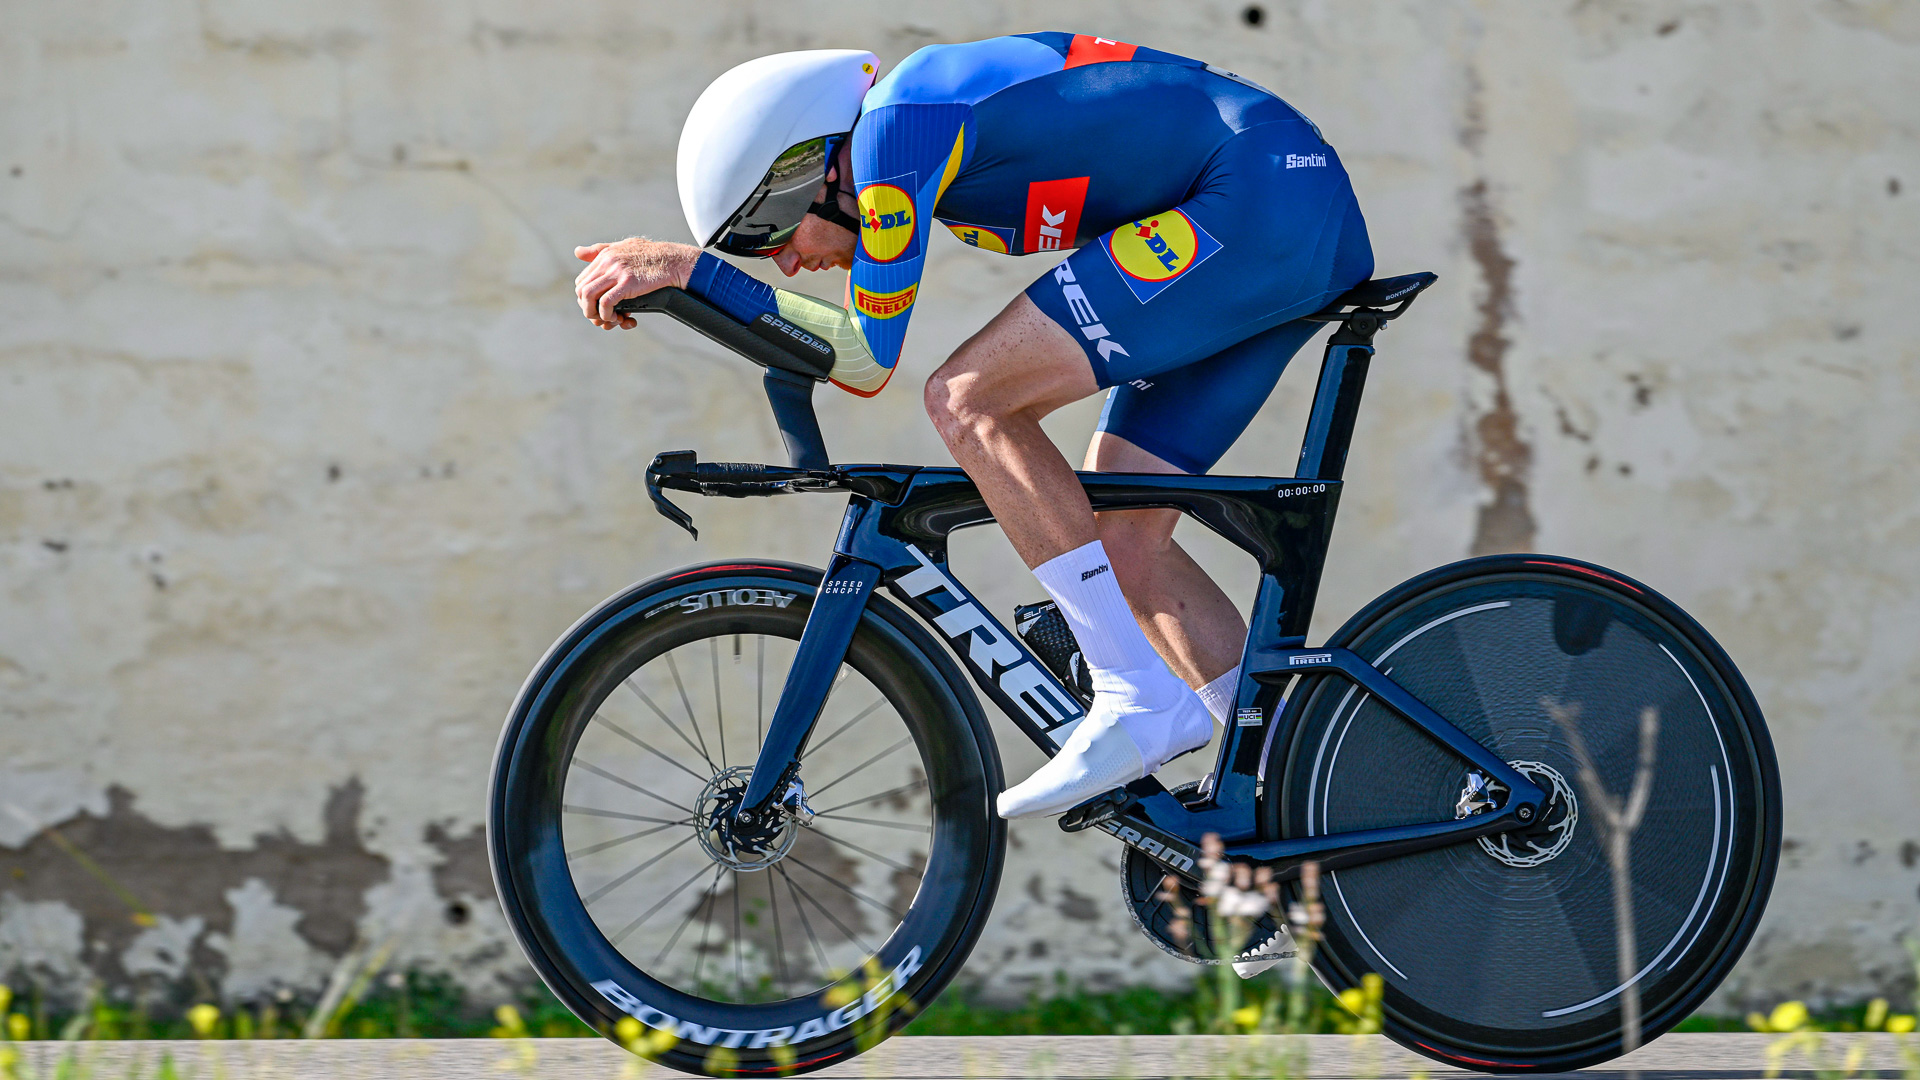 The image shows Tao Geoghegan Hart time trialling at the Volta Algarve.